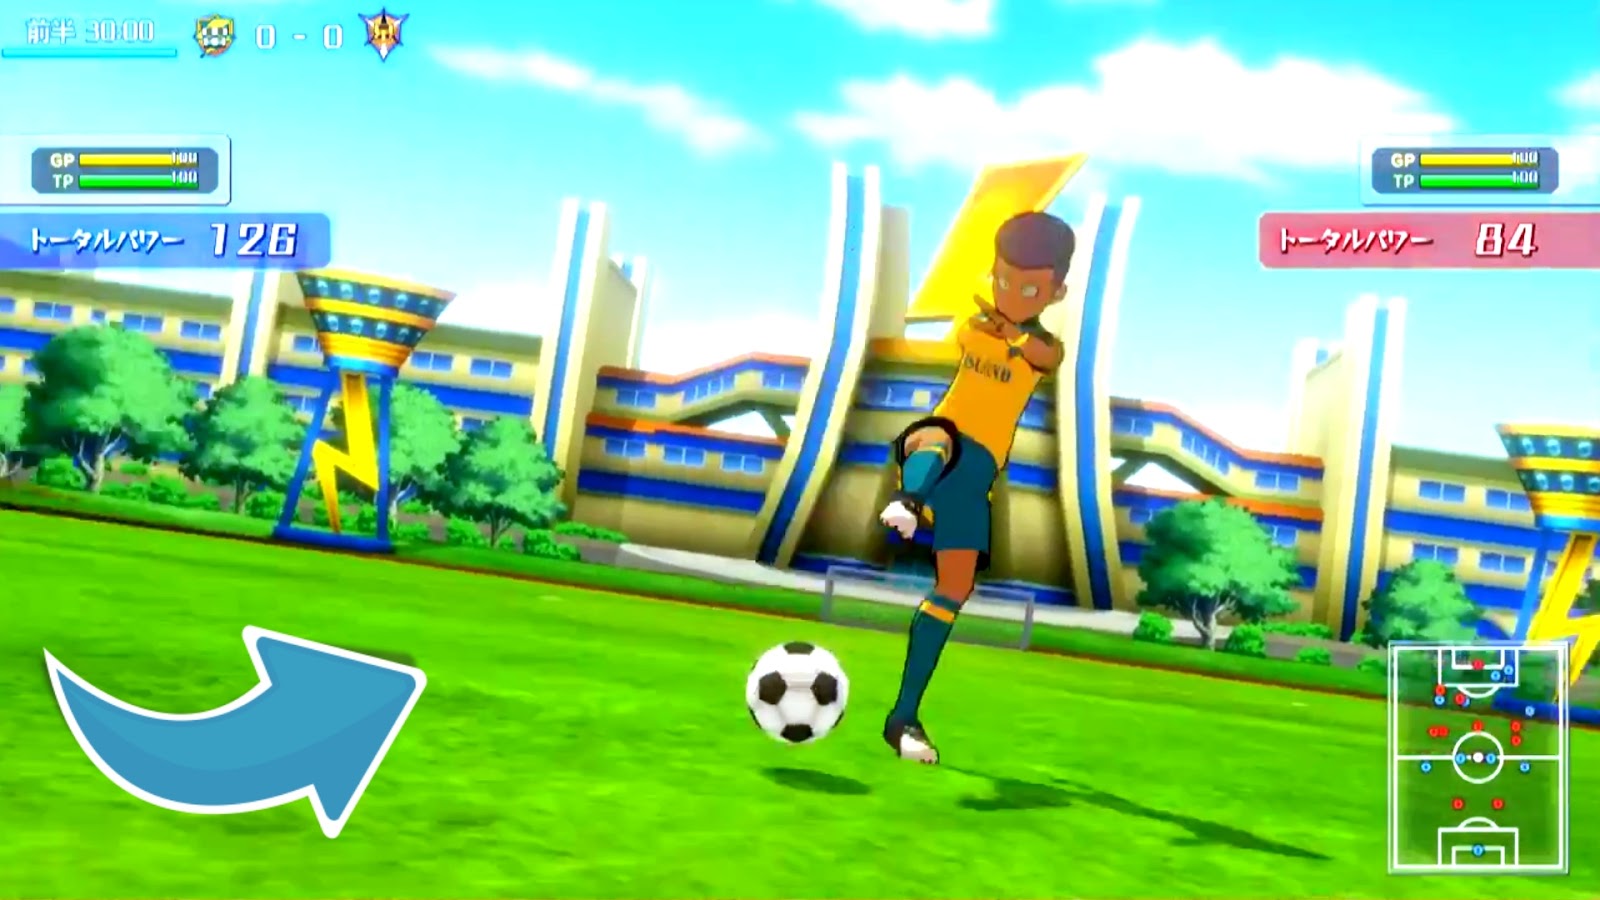 Inazuma Eleven Ares Download Pc Game - HD Wallpaper 